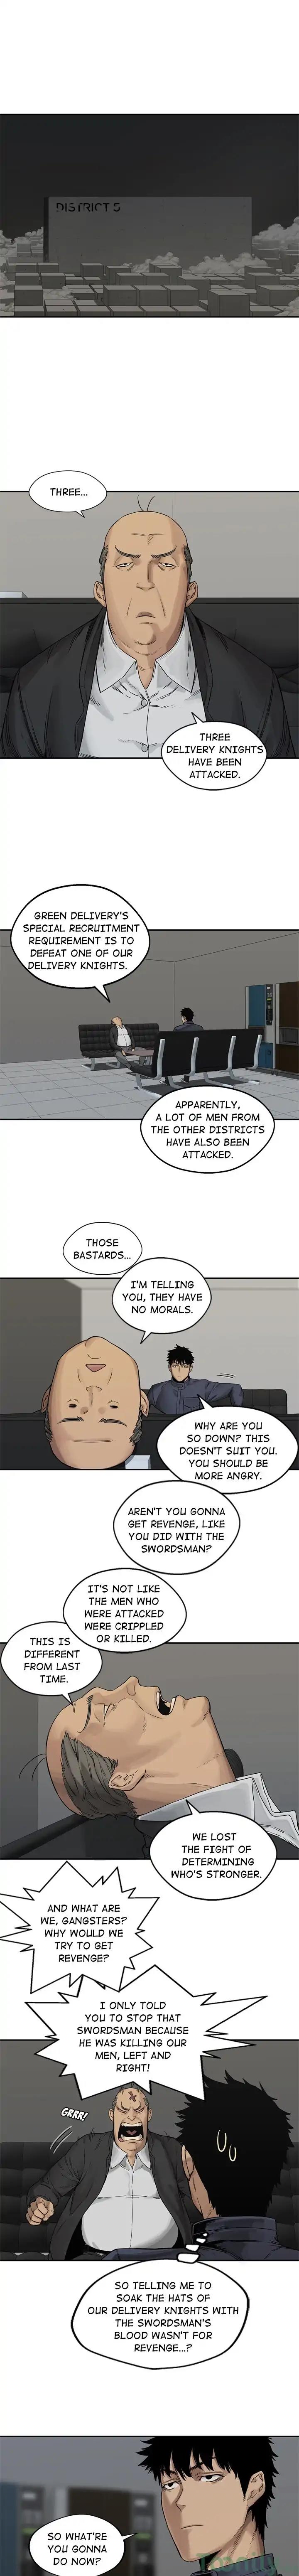 Delivery Knight Episode 26